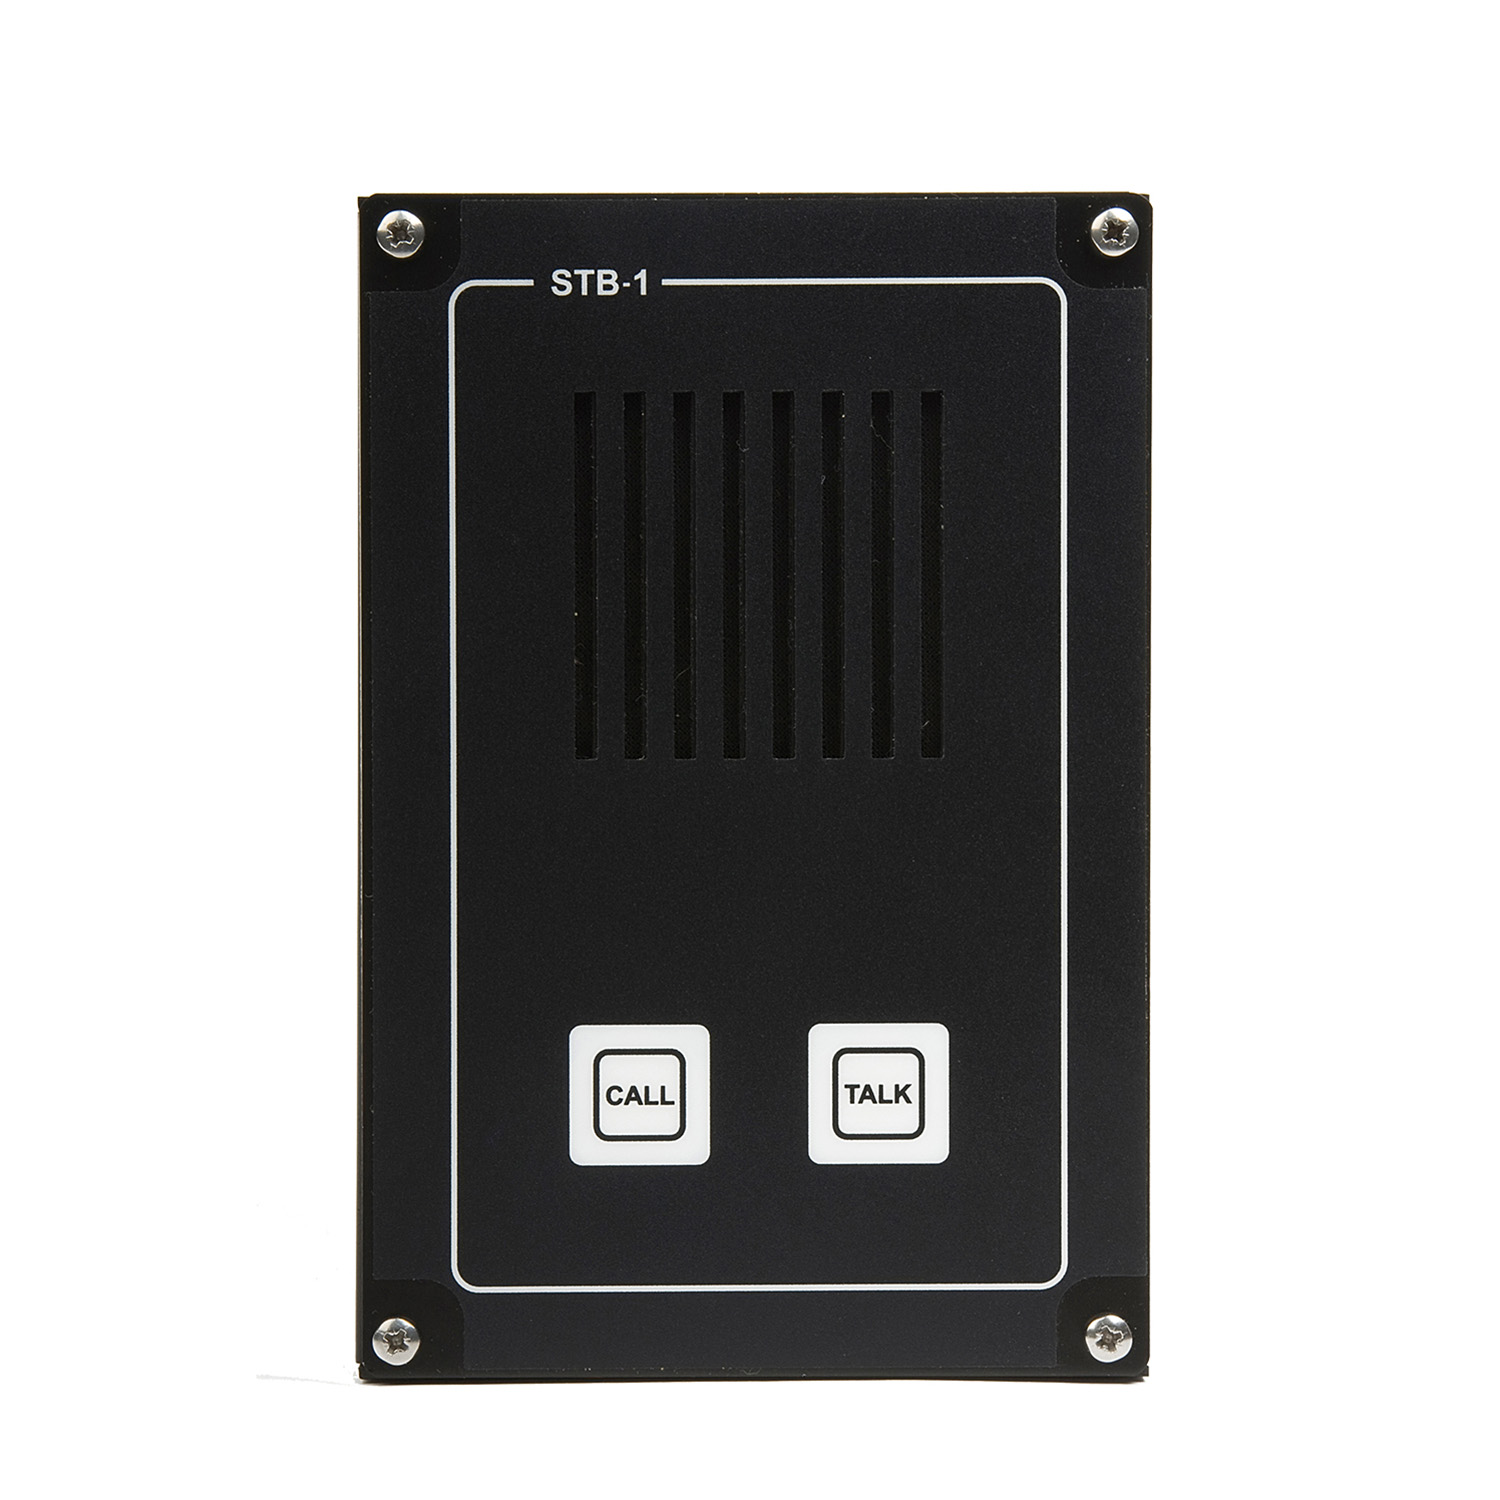 3005020057 STB1 Wall mounted sub station with call and talk button